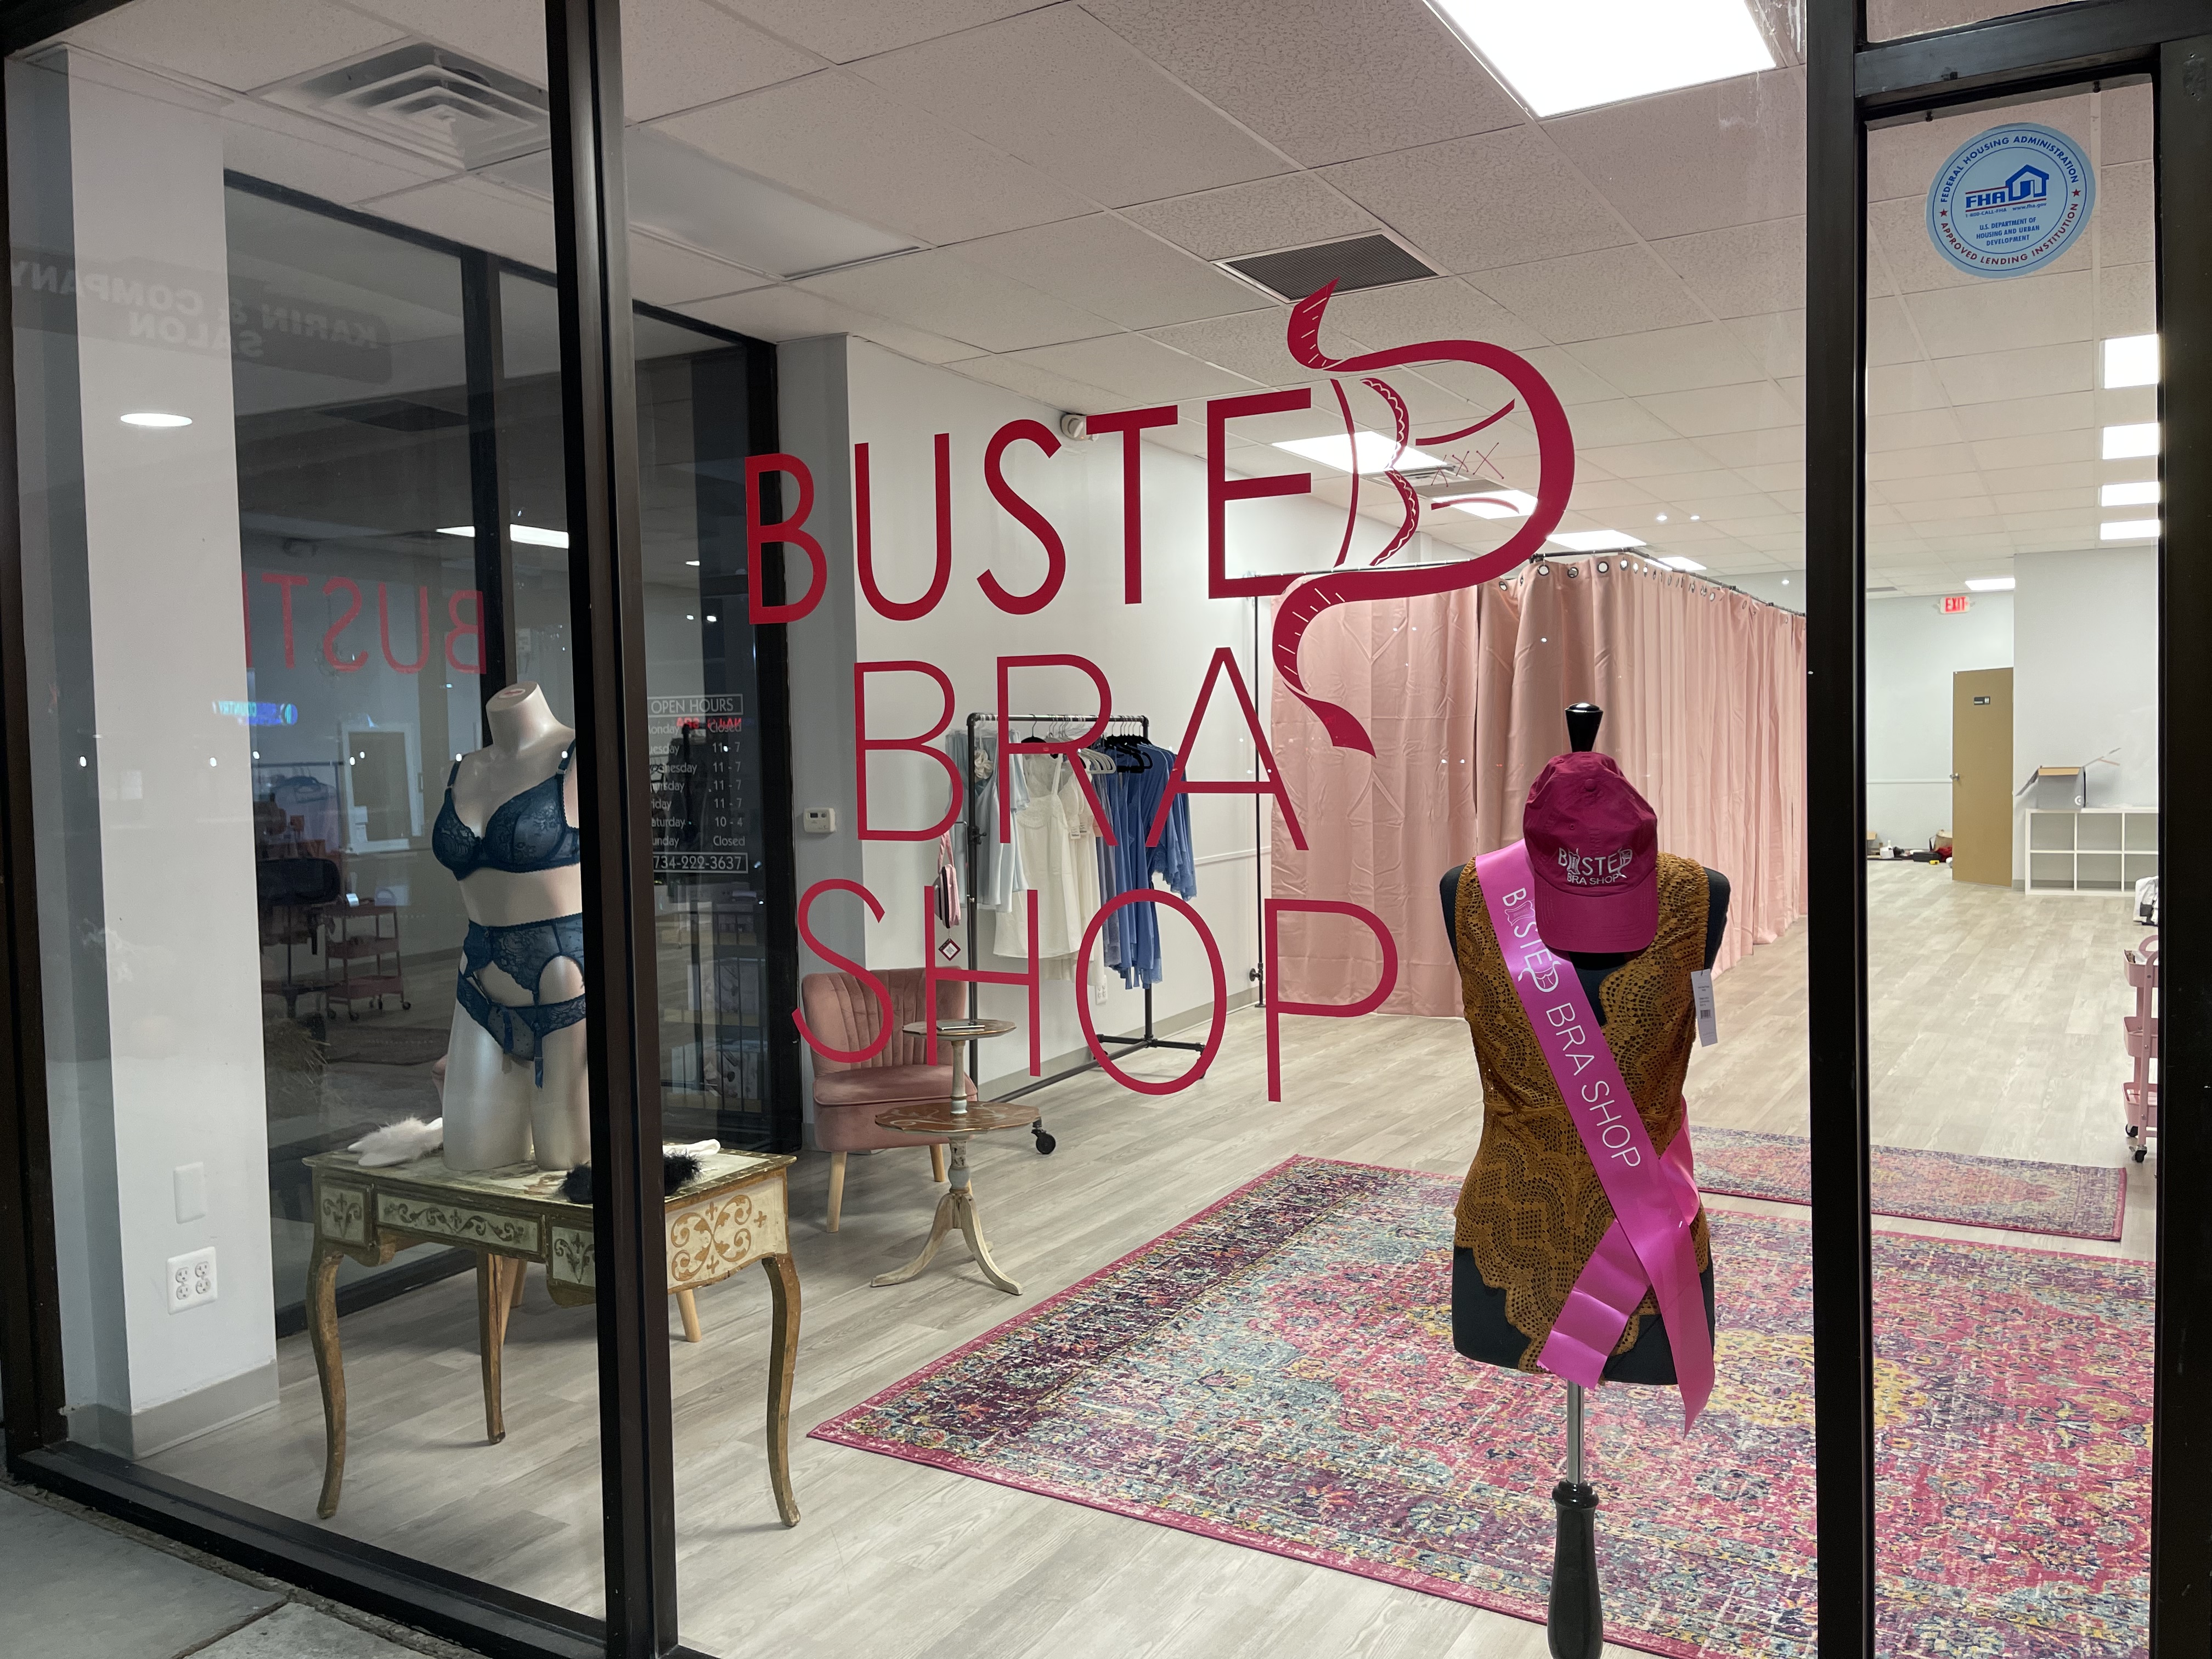 Award-winning Busted Bra Shop opens larger store in Ann Arbor 